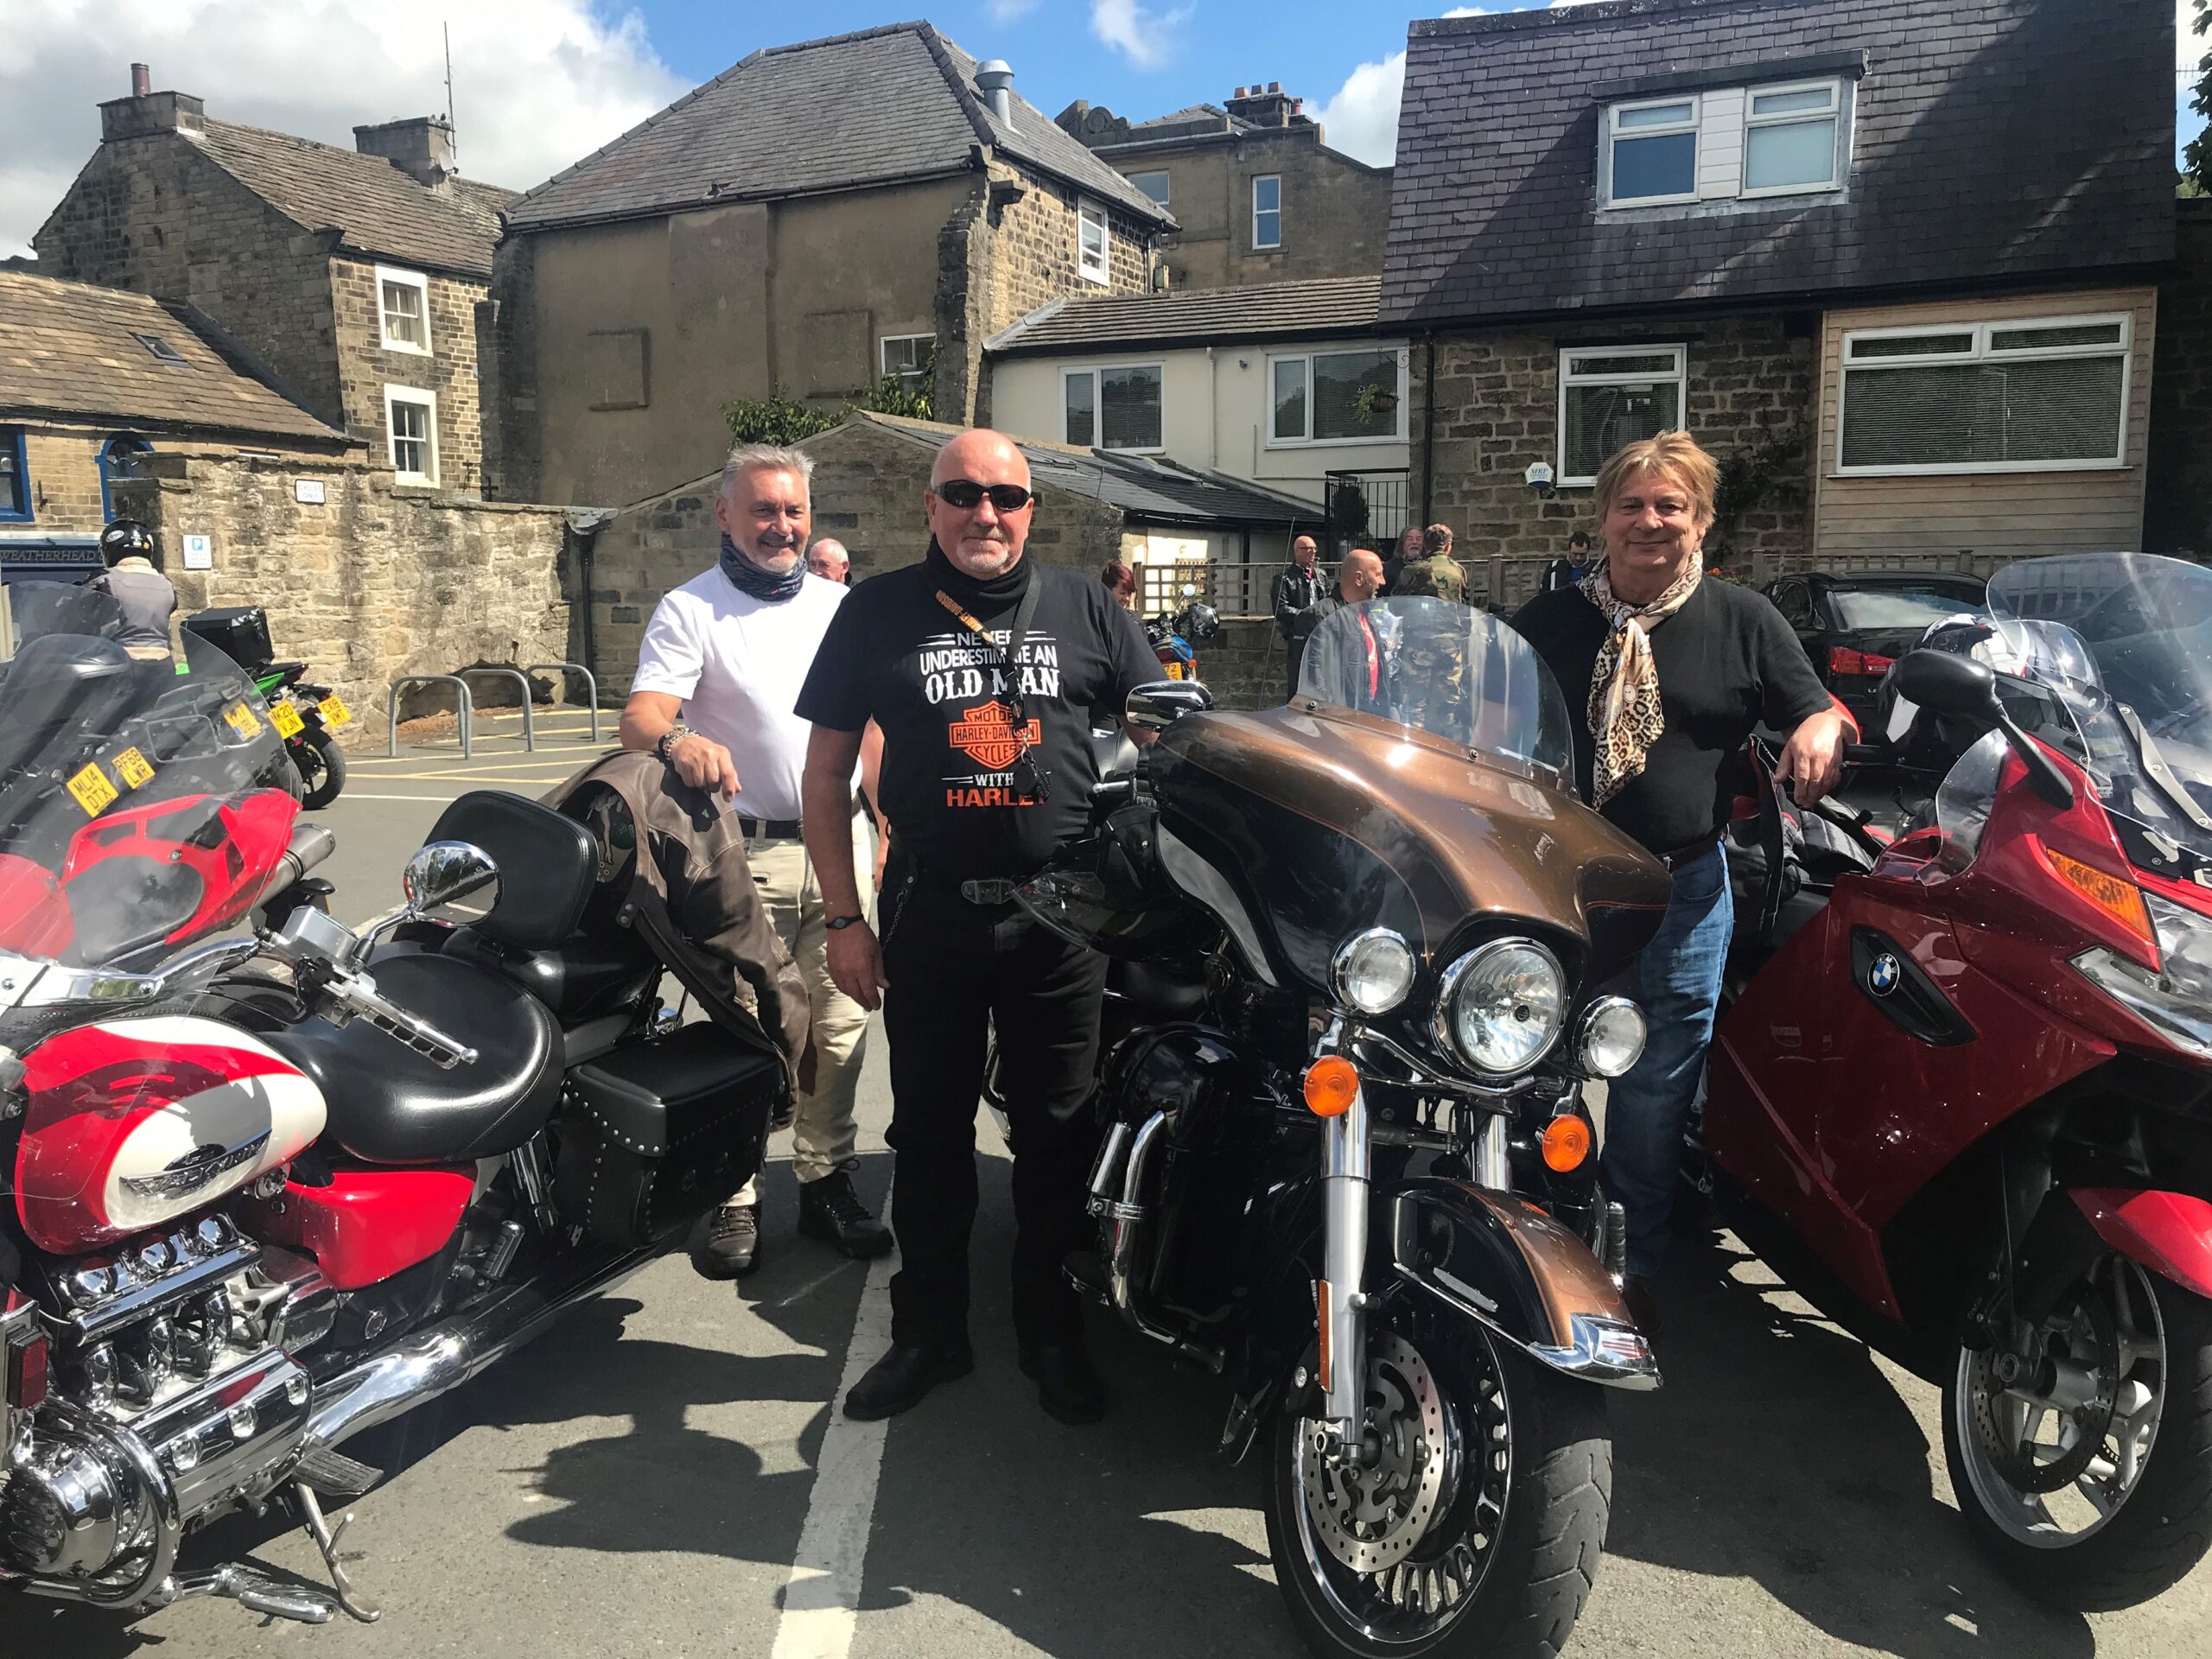 Photograph of three motorcyclists in Pateley Bridge